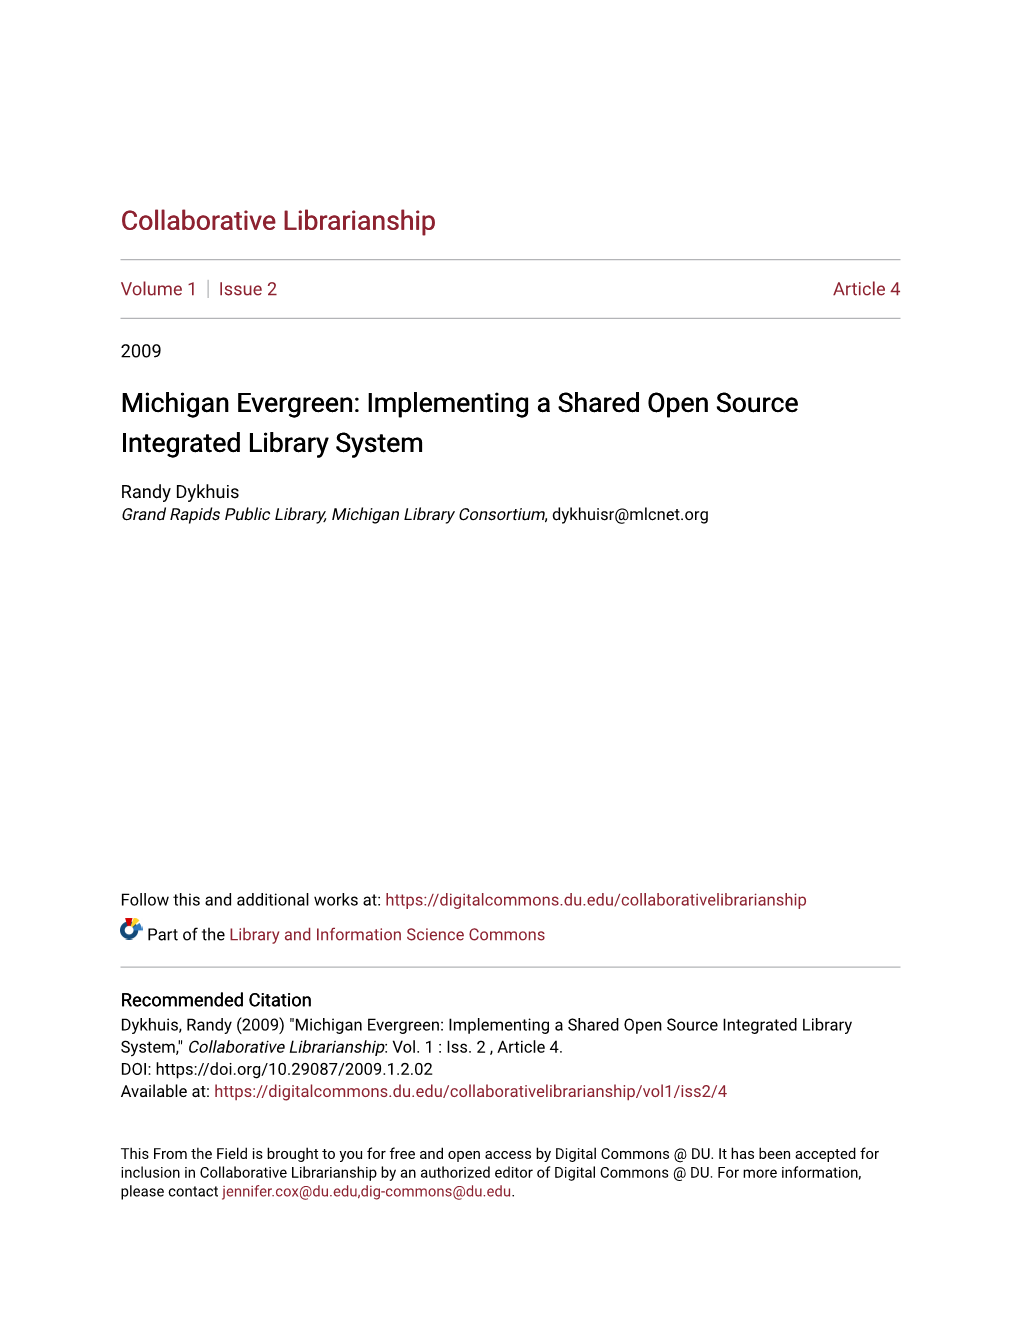 Michigan Evergreen: Implementing a Shared Open Source Integrated Library System